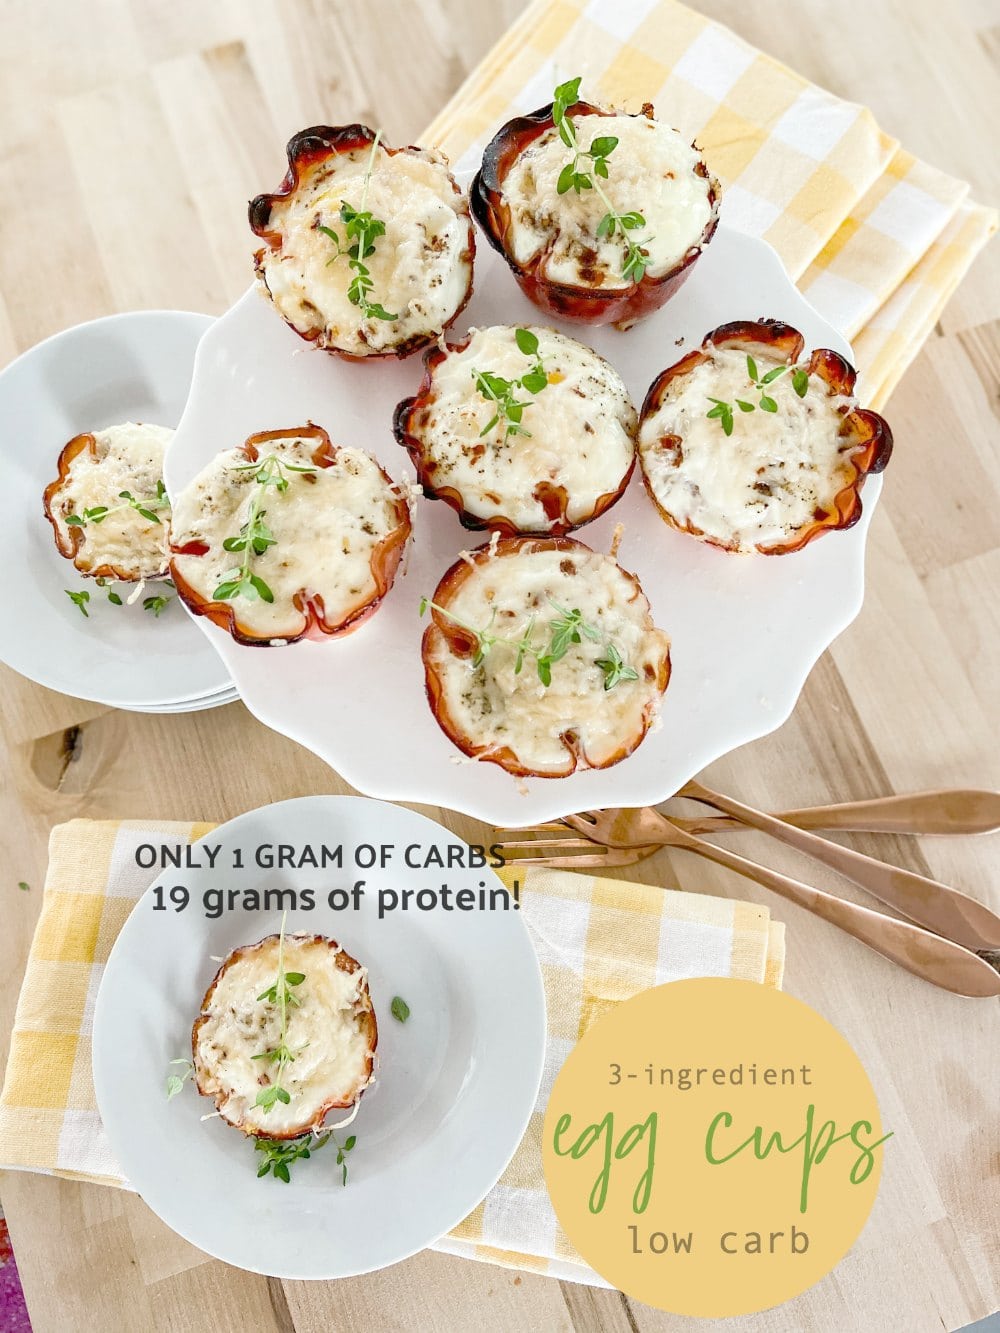 3-ingredient egg cups - 1 gram of carbs, 19 grams of protein! 